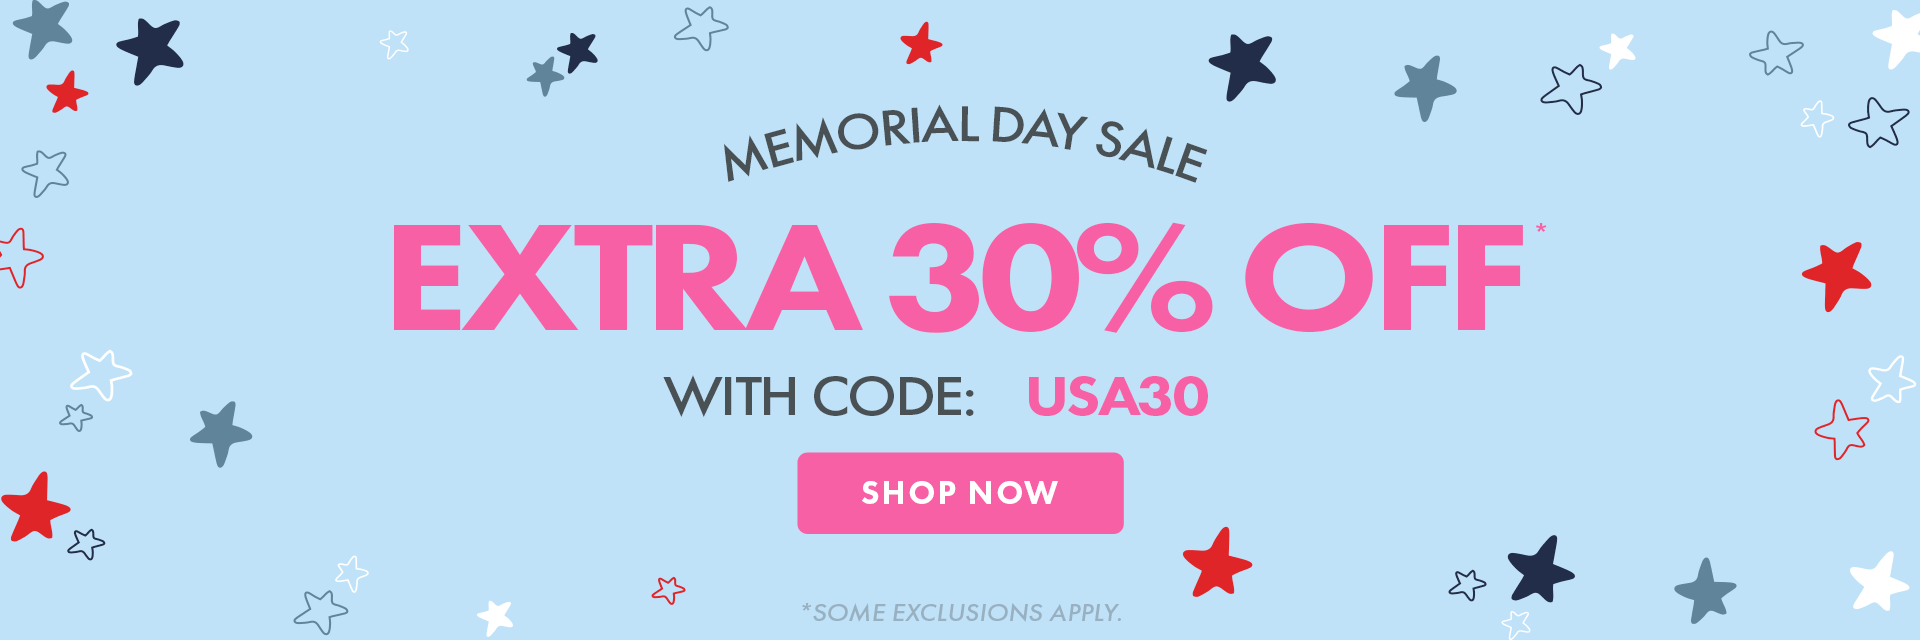 Save an Extra 30% OFF Sitewide* with code: USA30